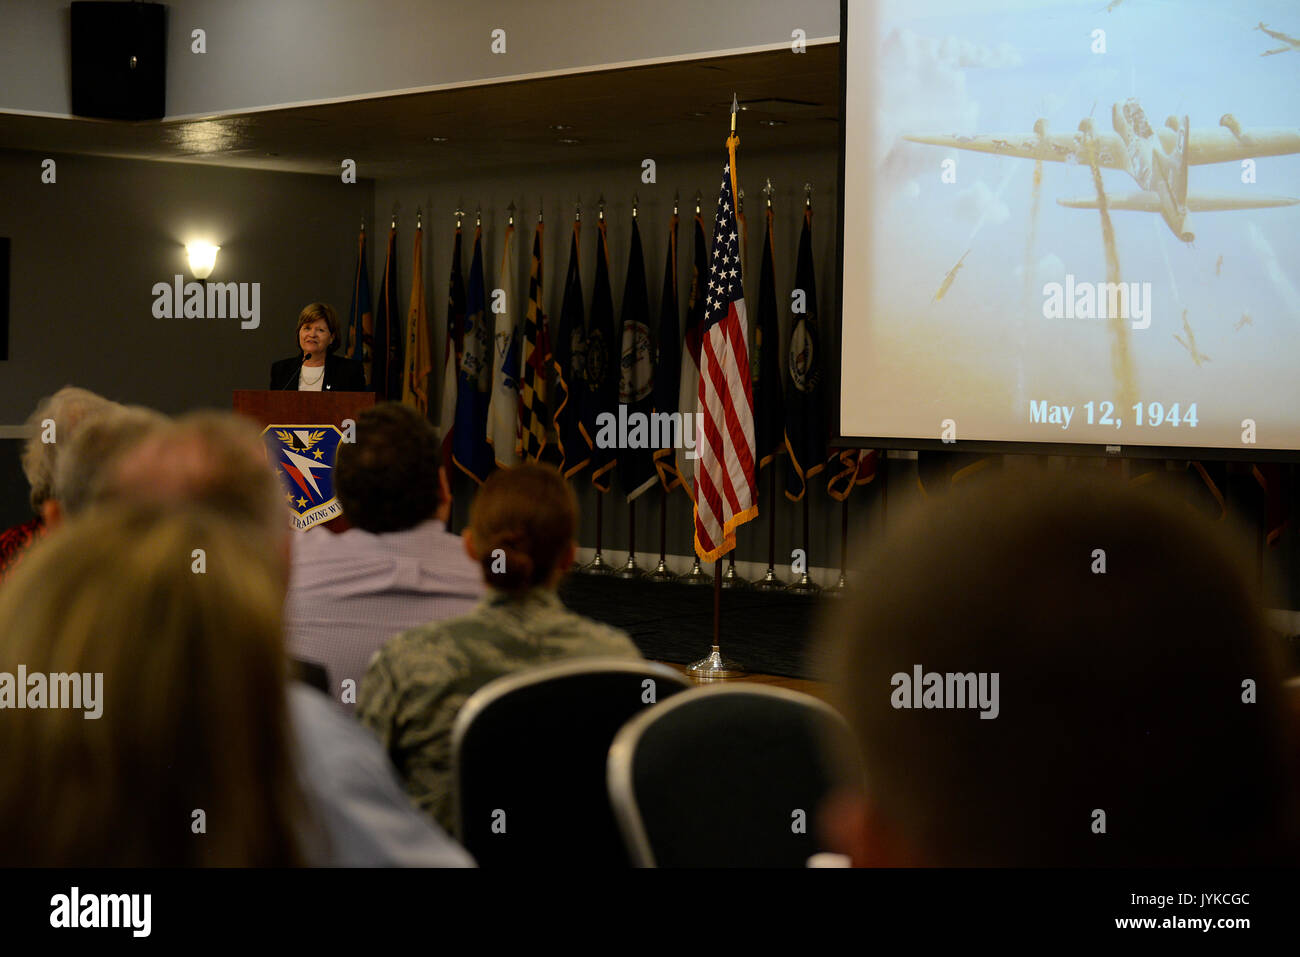 Justice Sharon Lee, from the Tennessee Supreme Court, shares her father’s story with an audience Aug. 11, 2017, on Columbus Air Force Base, Mississippi, during the Base Community Council luncheon. Her father was shot in the head, shoulder, back and wrist during a bombing mission while on board a B-17 Flying Fortress. Some shrapnel was left in his body for his entire life. (U.S. Air Force photo by Airman 1st Class Keith Holcomb) Stock Photo